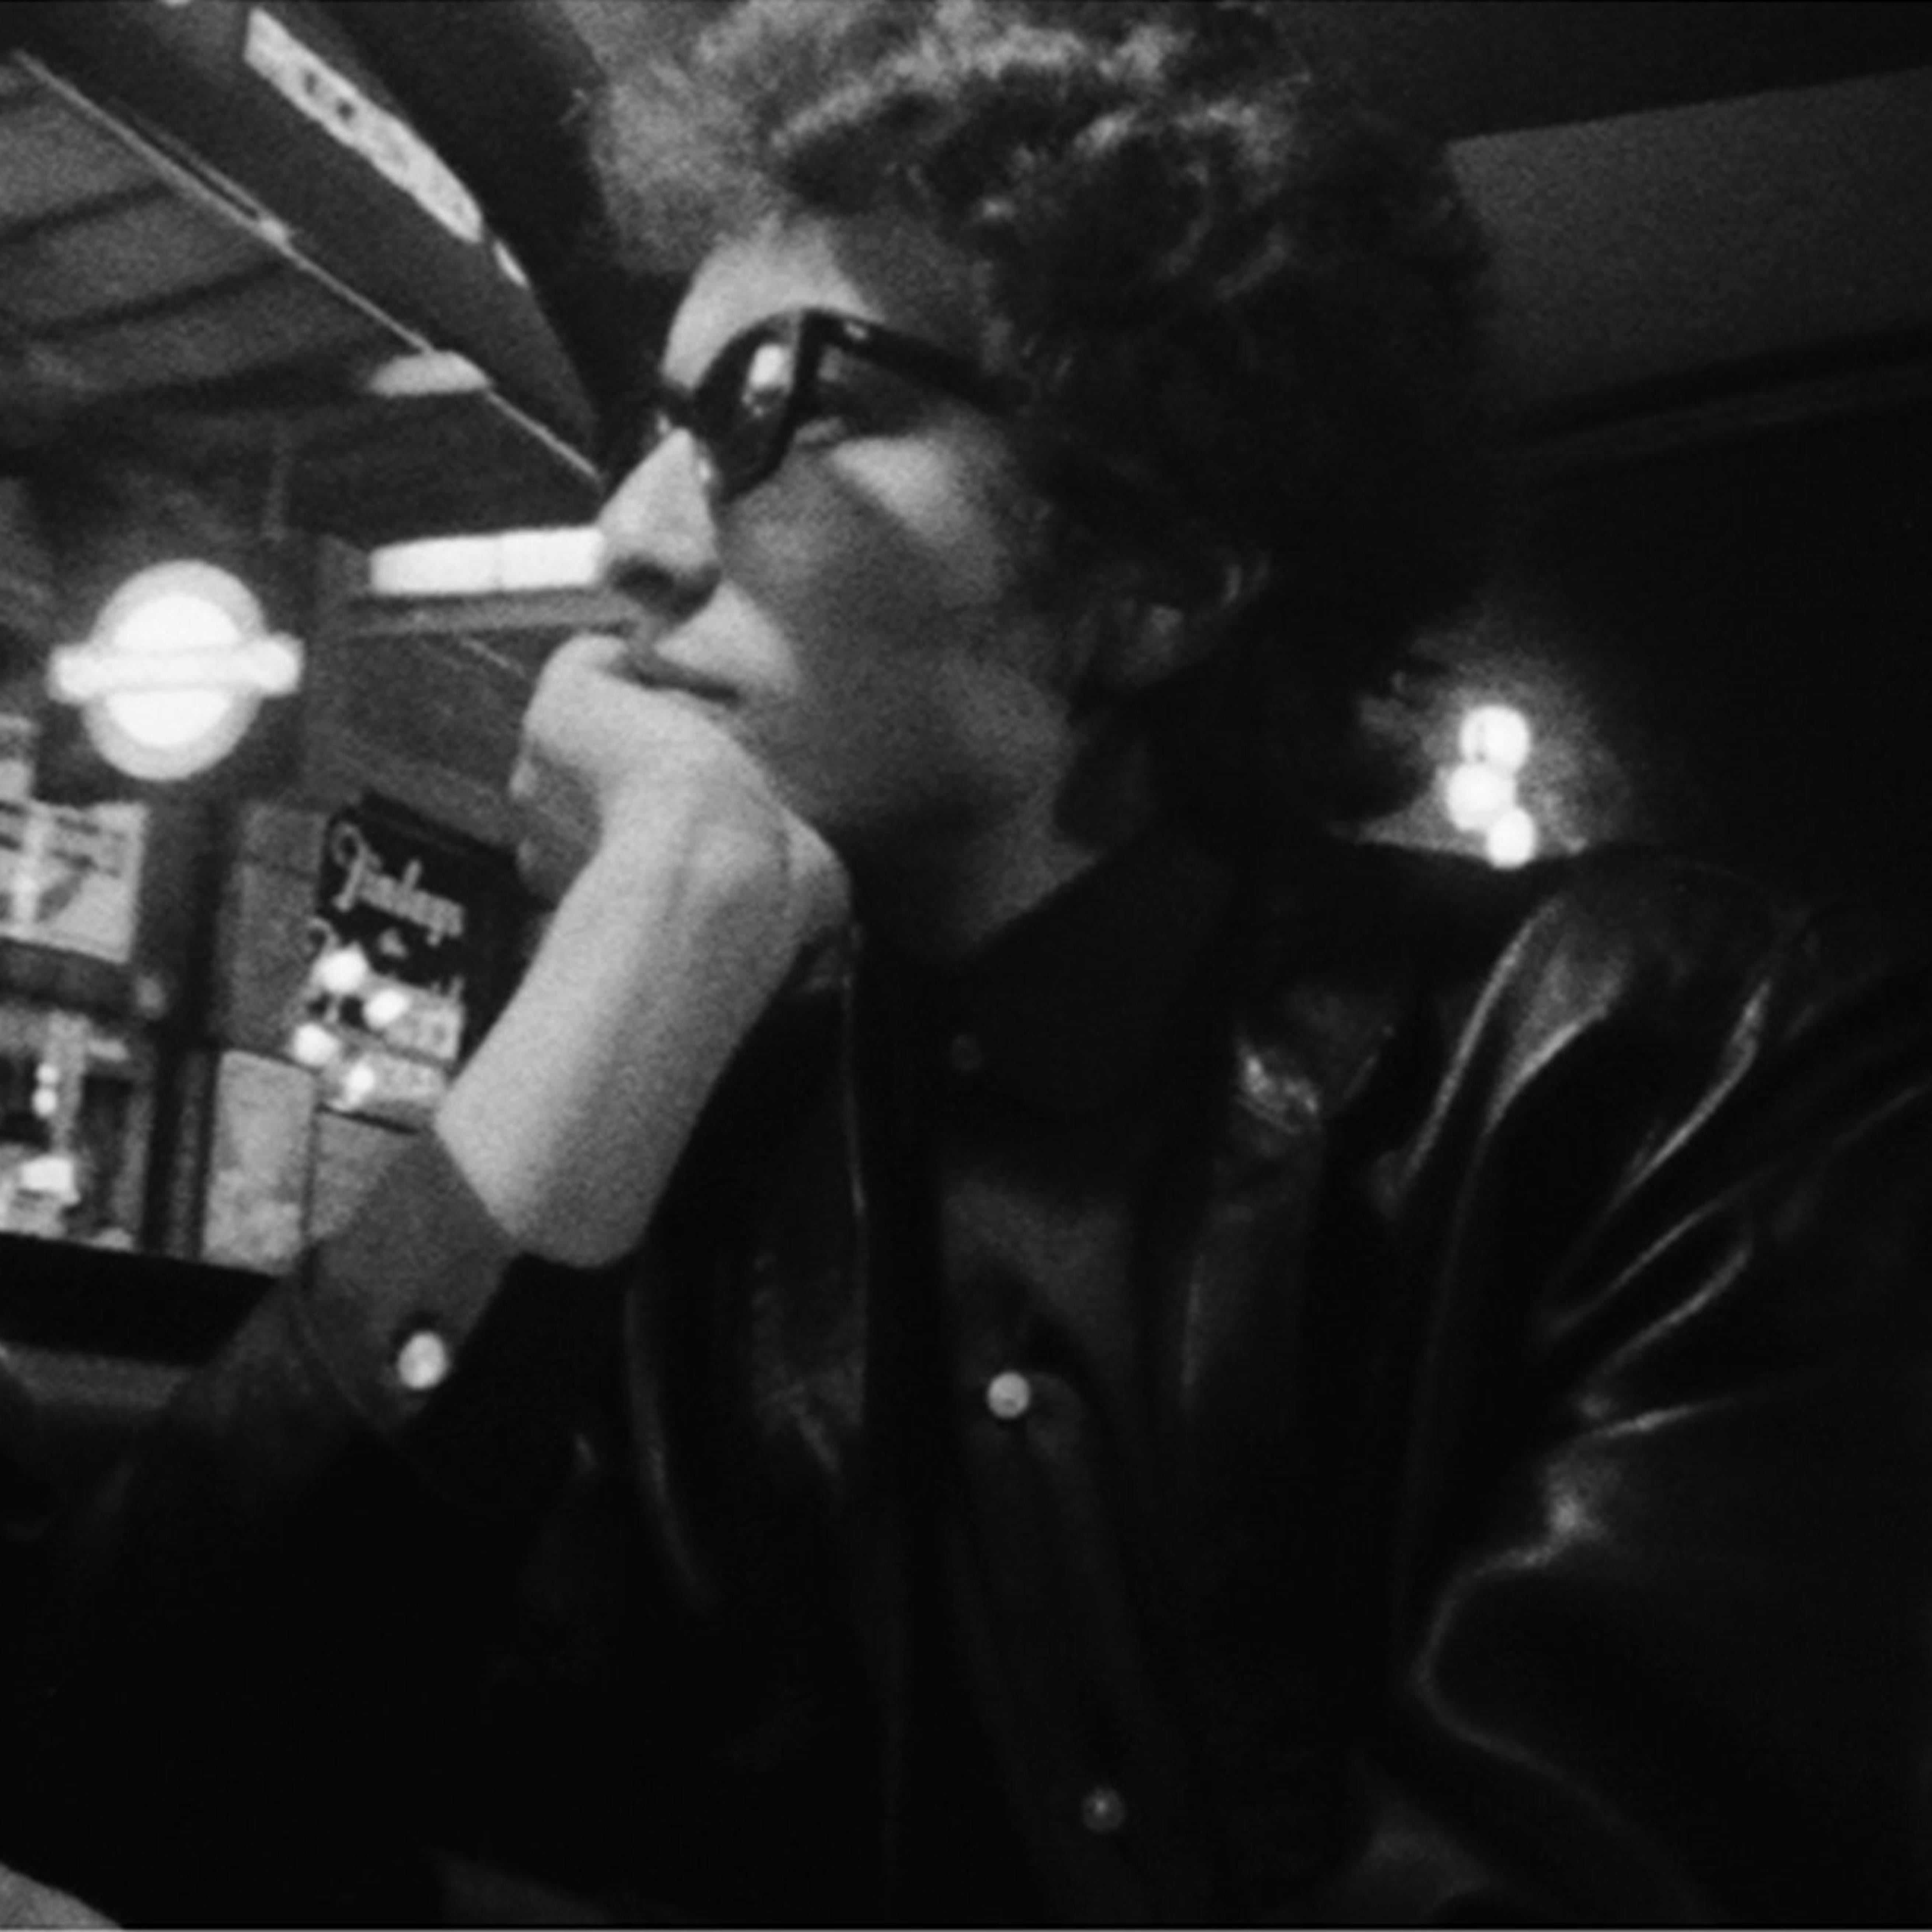 Bob Dylan en route after 1st show at Royal Albert Hall (tryptych)  - Photograph by D.A. Pennebaker